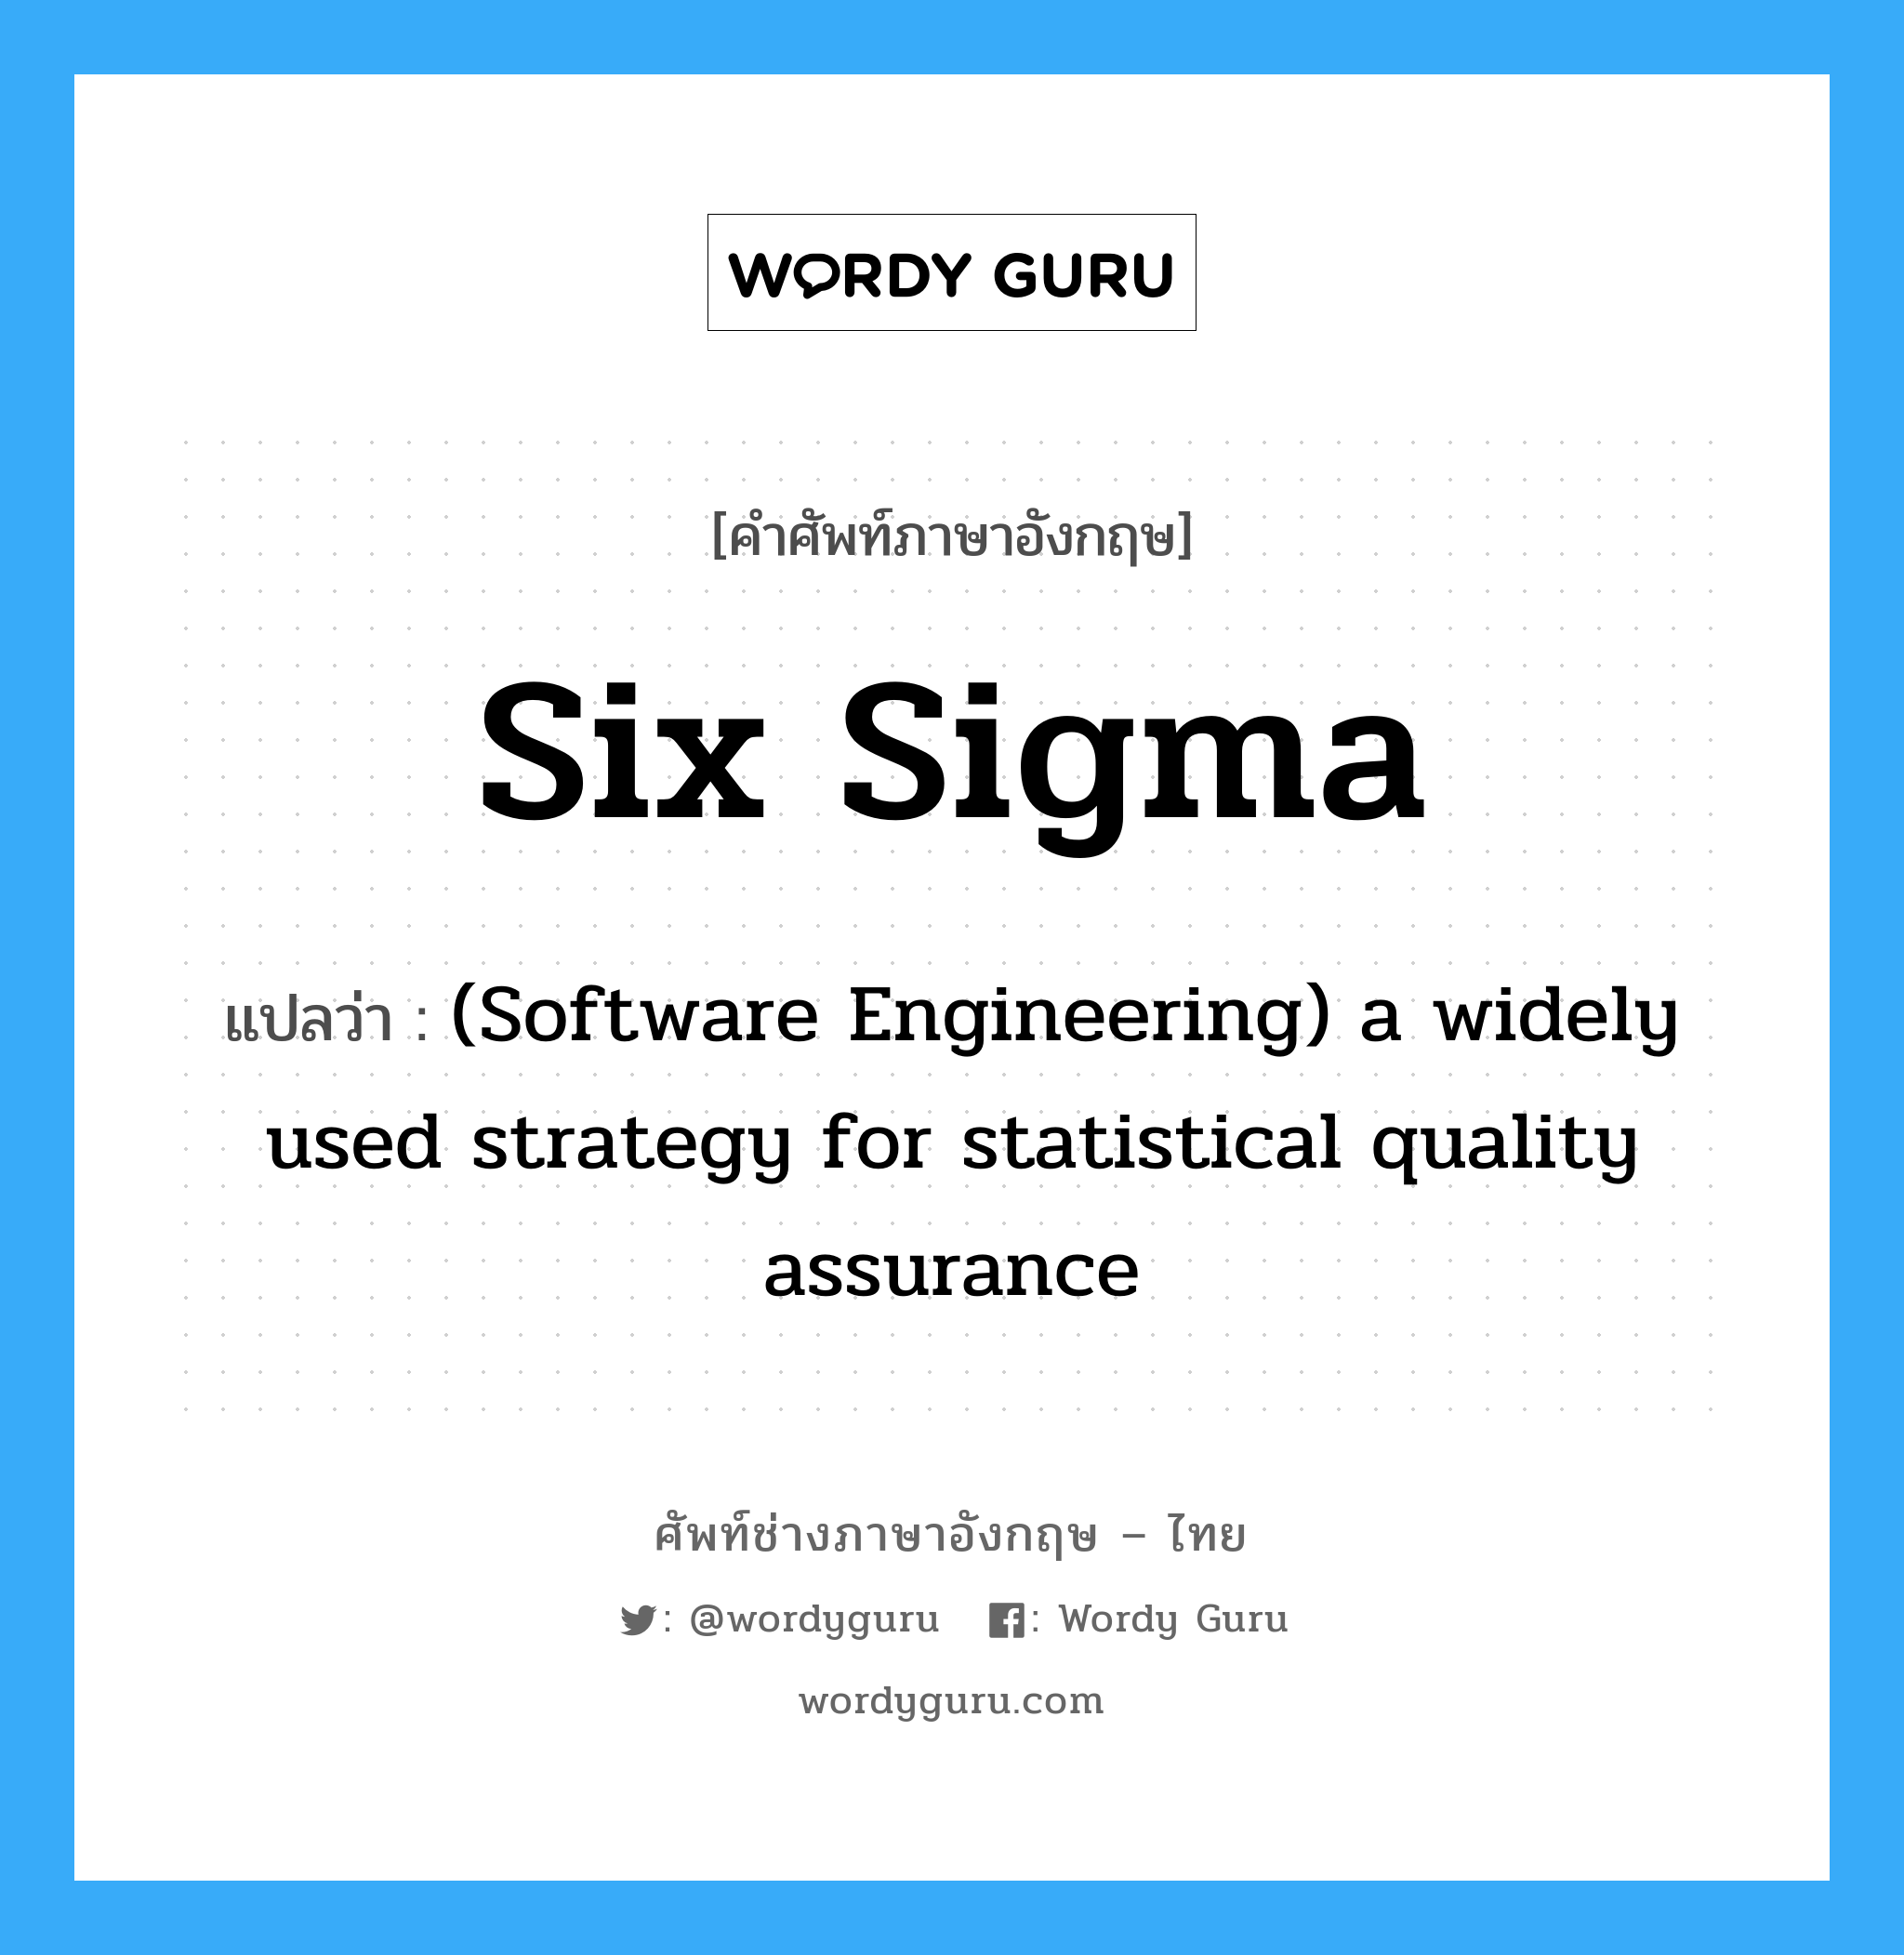 Six sigma แปลว่า?, คำศัพท์ช่างภาษาอังกฤษ - ไทย Six sigma คำศัพท์ภาษาอังกฤษ Six sigma แปลว่า (Software Engineering) a widely used strategy for statistical quality assurance